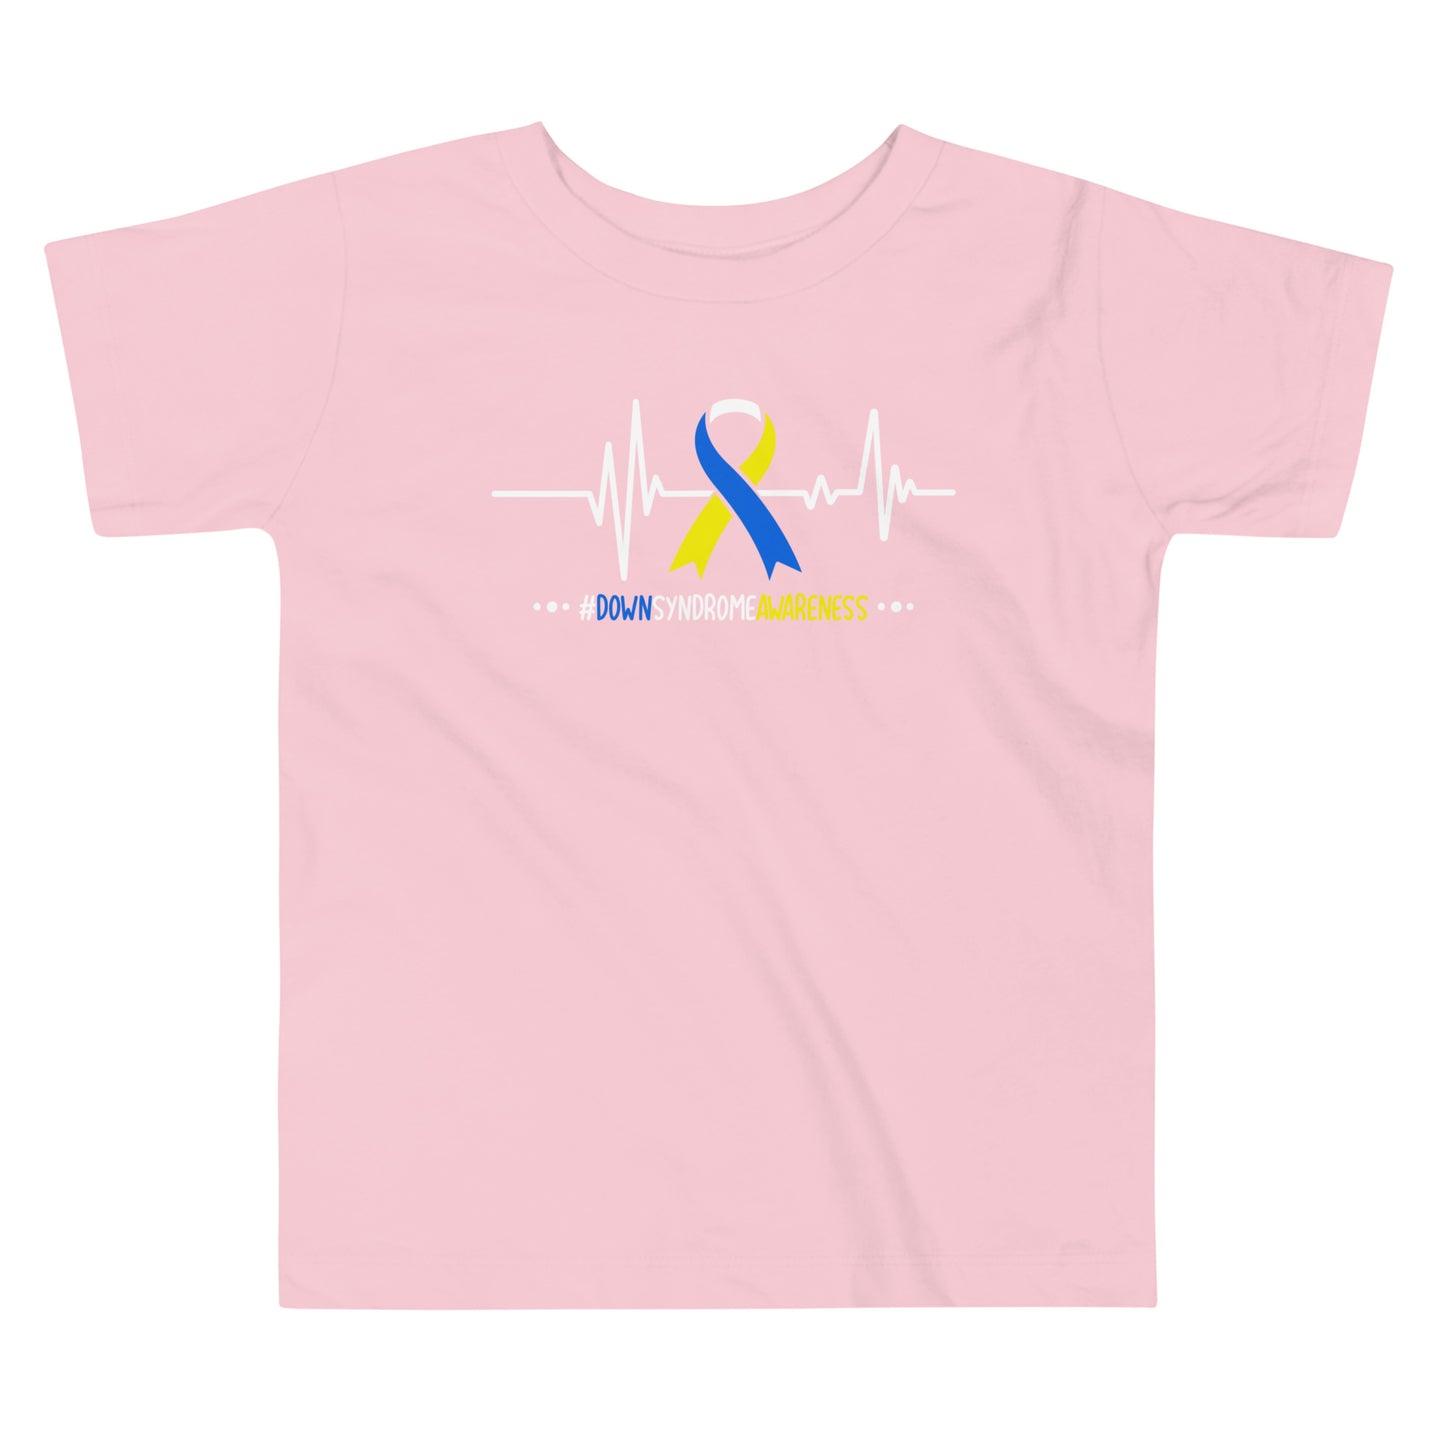 Down Syndrome Awareness Quality Cotton Bella Canvas Toddler T-Shirt